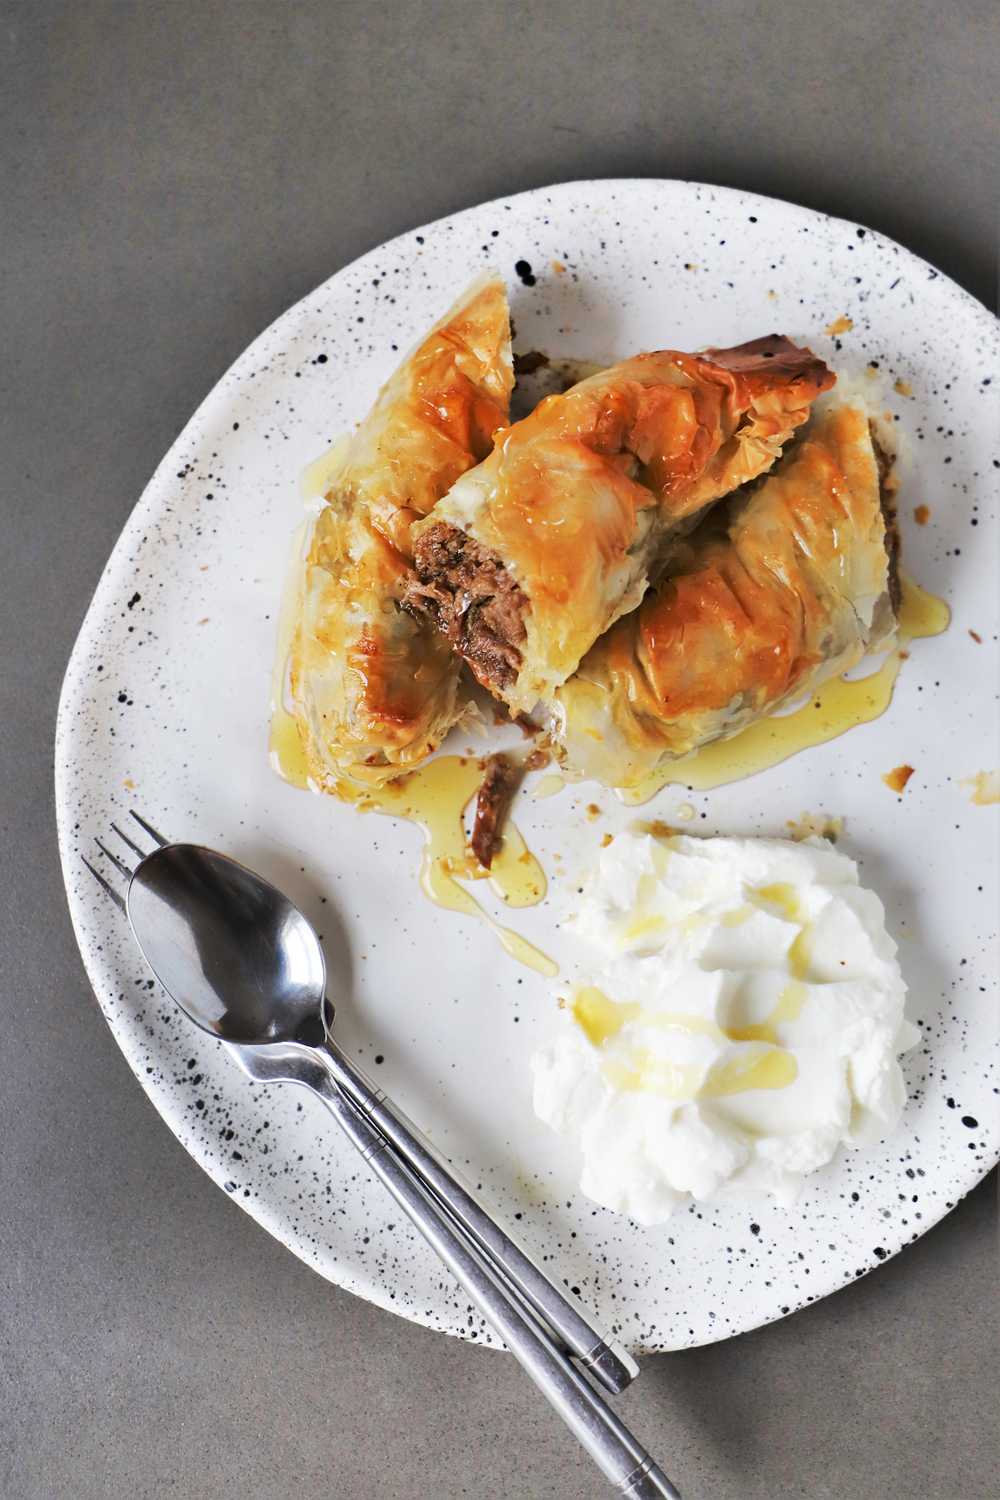 Lamb pie with phyllo, served with honey and yogurt.